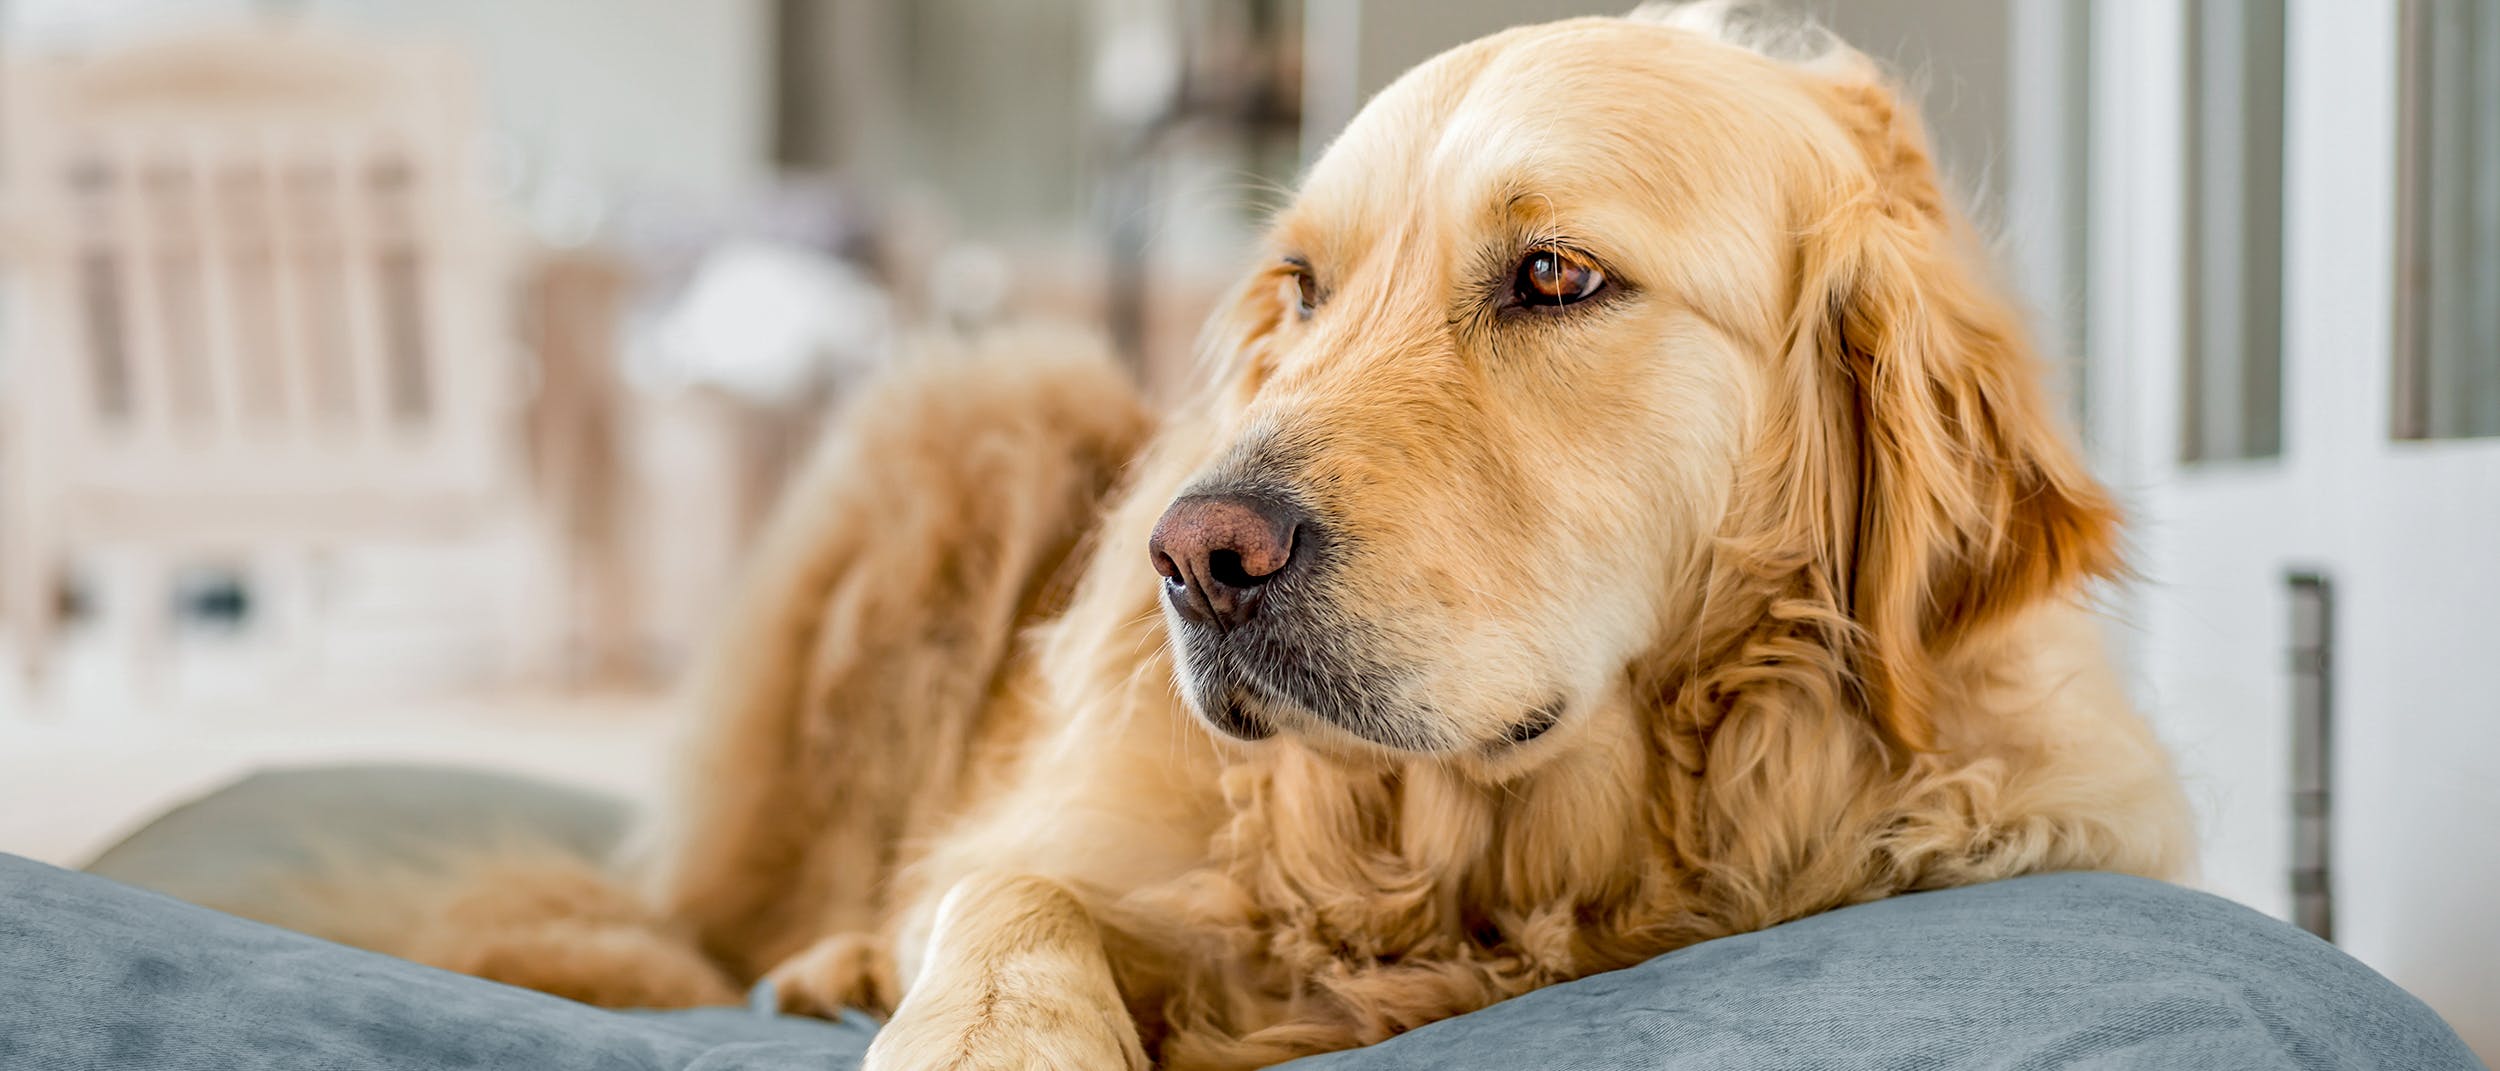 When do dogs stop gaining weight?